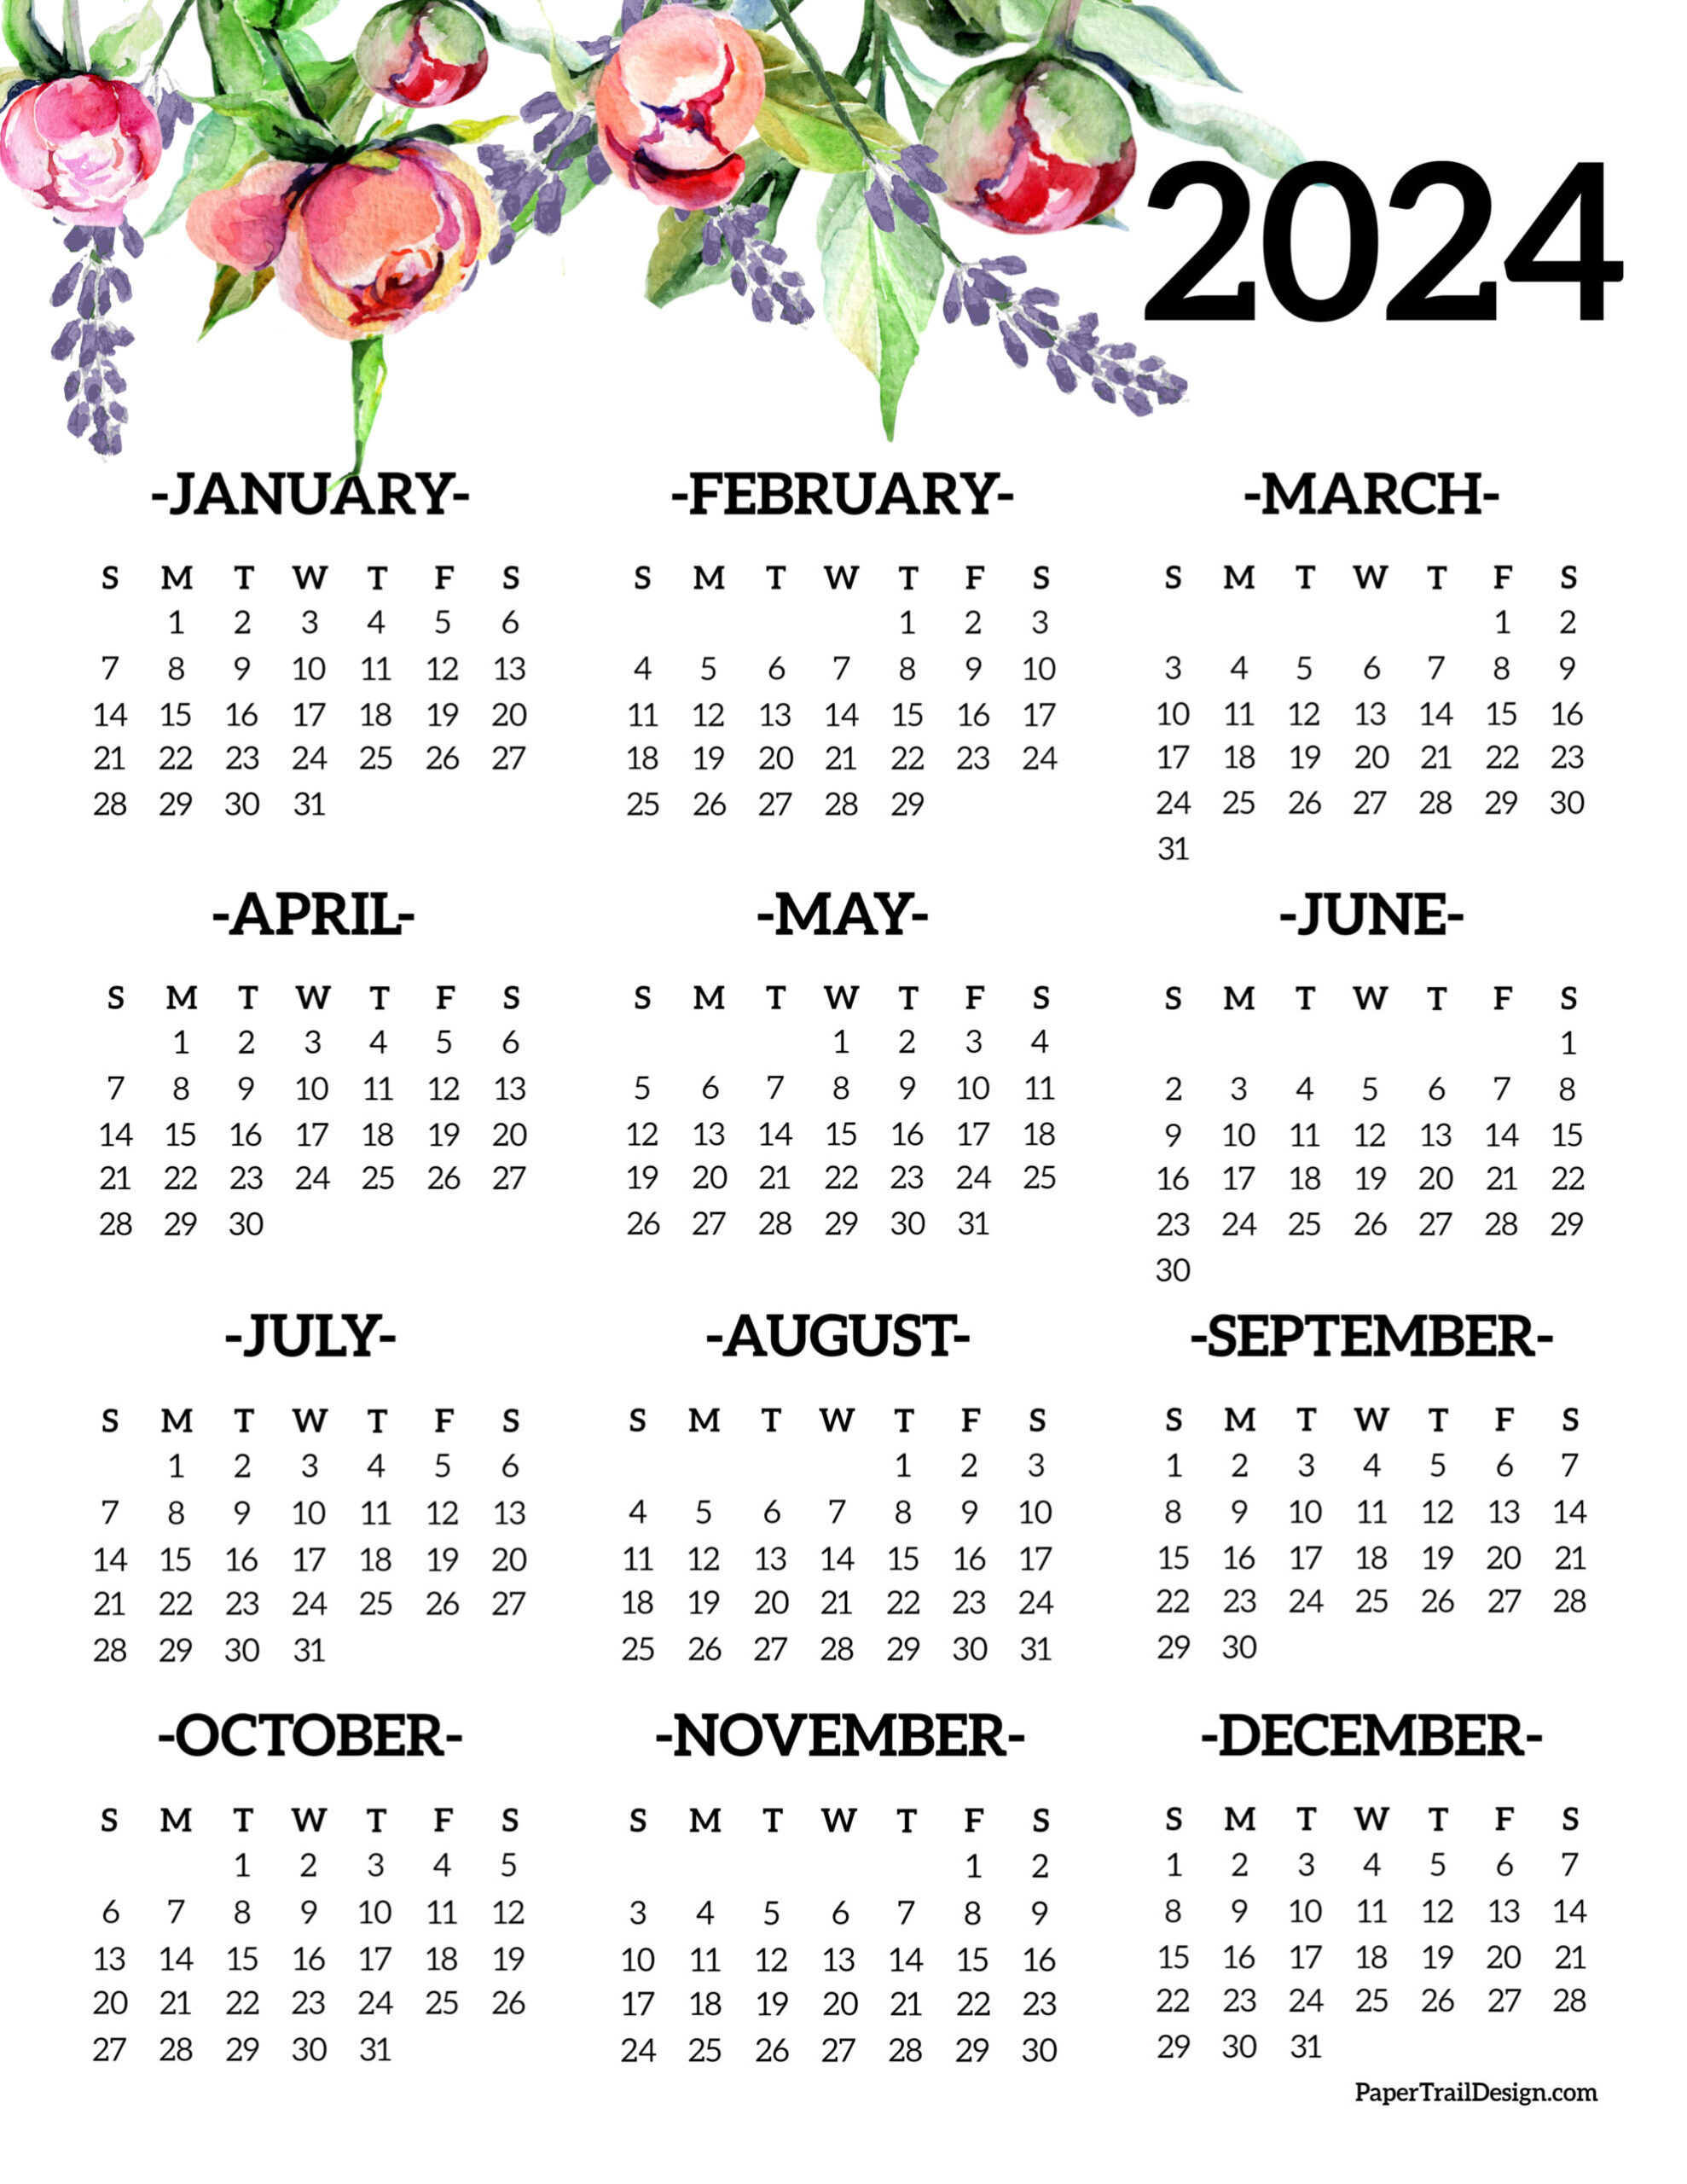 Calendar 2024 Printable One Page - Paper Trail Design for Printable At A Glance Calendar 2024